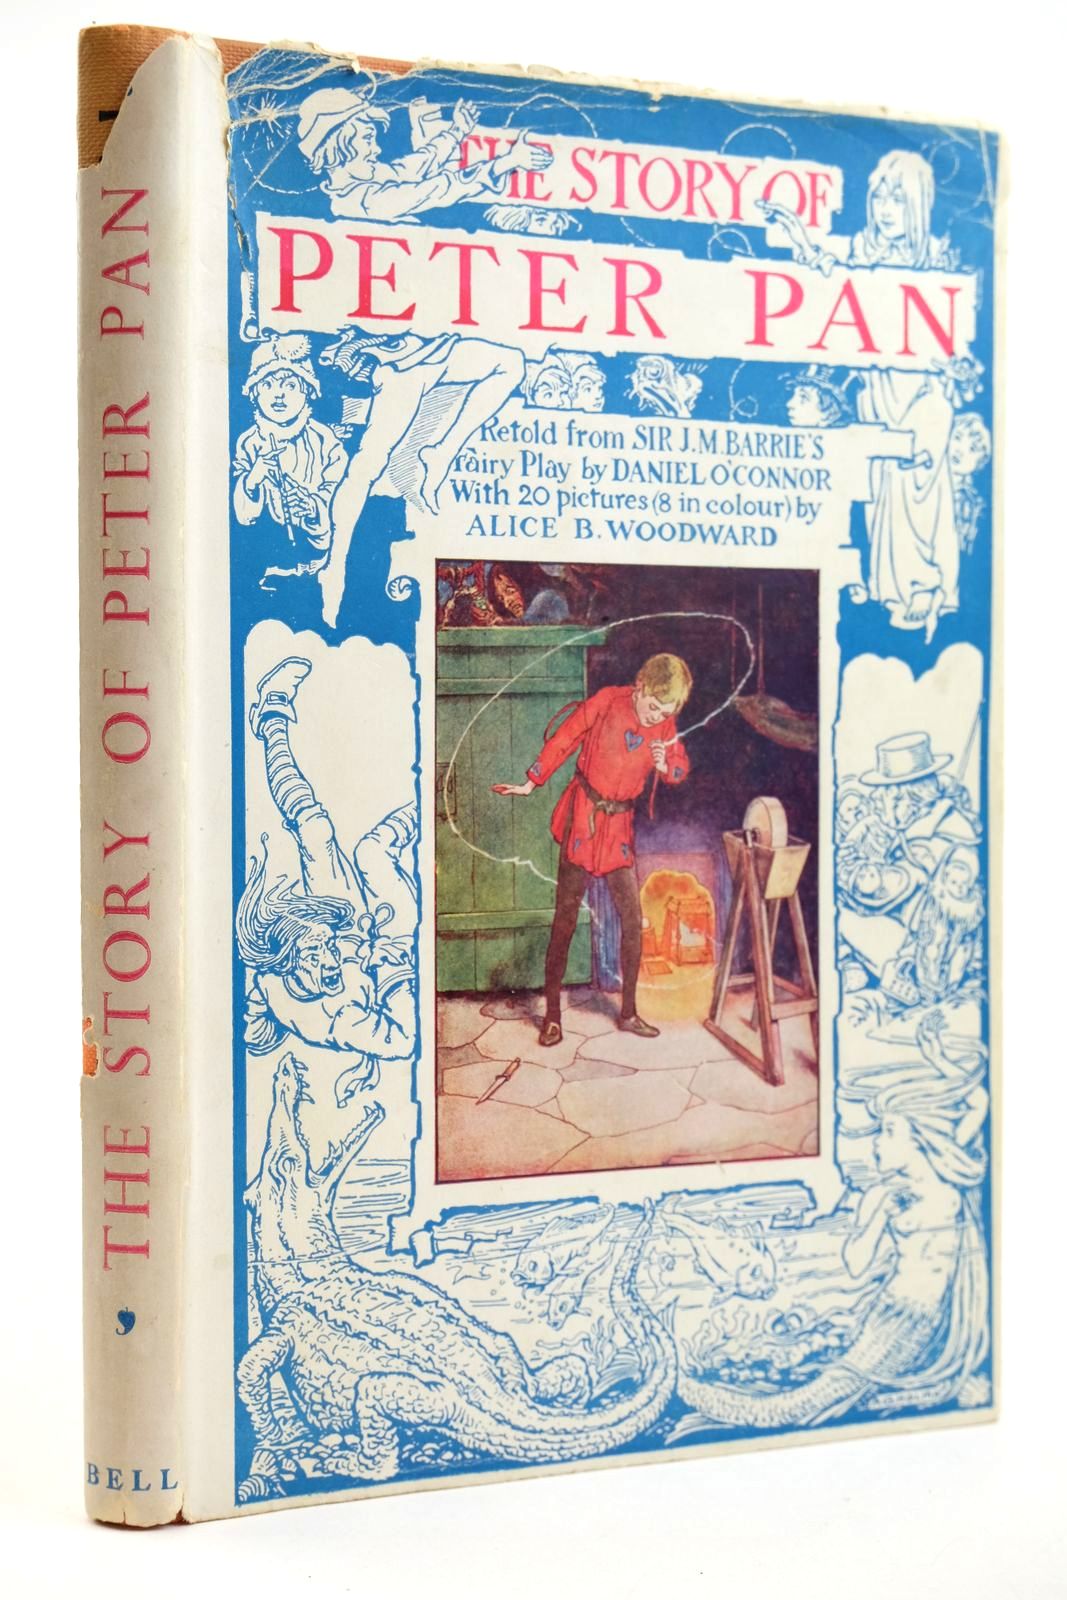 Photo of THE STORY OF PETER PAN written by Barrie, J.M. O'Connor, Daniel illustrated by Woodward, Alice B. published by G. Bell &amp; Sons Ltd. (STOCK CODE: 2132405)  for sale by Stella & Rose's Books